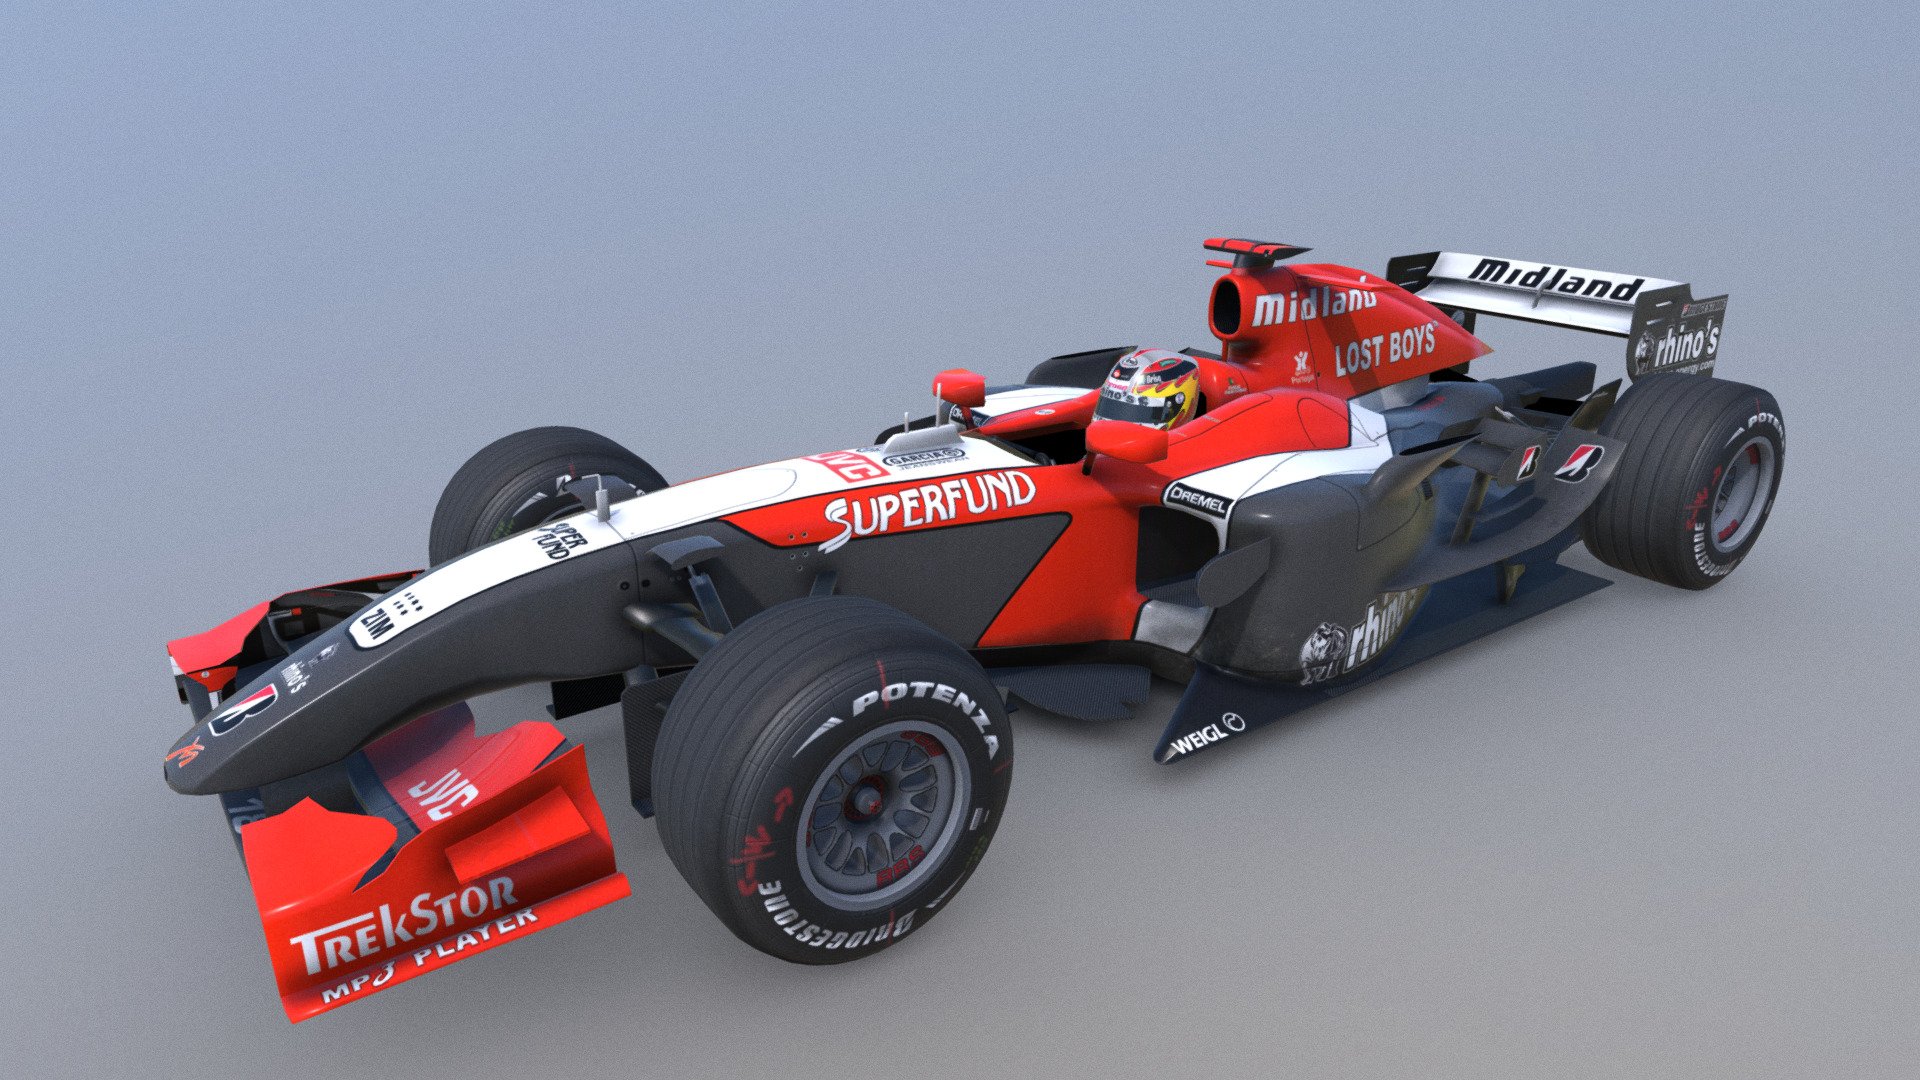 The Midland Formula One car of season 2006 was created for the CTDP F1 2006 mod for rFactor in 2007 3d model